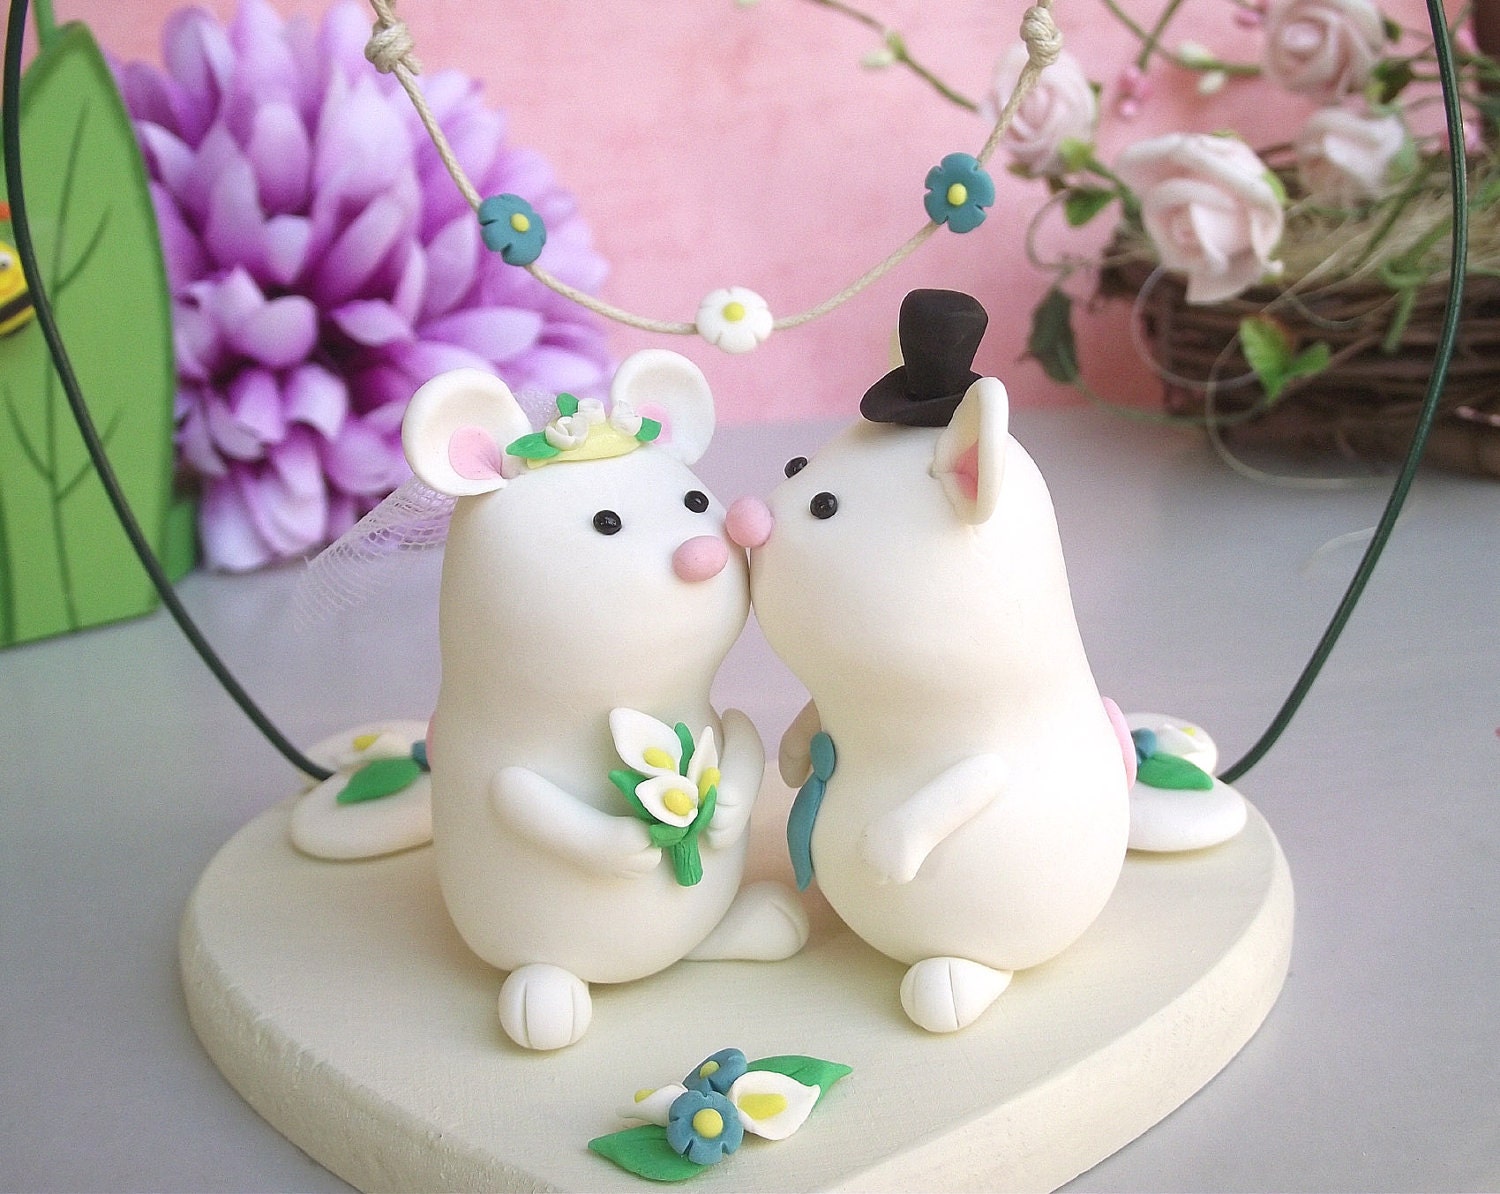 Unique mice wedding cake topper, painted wooden base and floral decoration